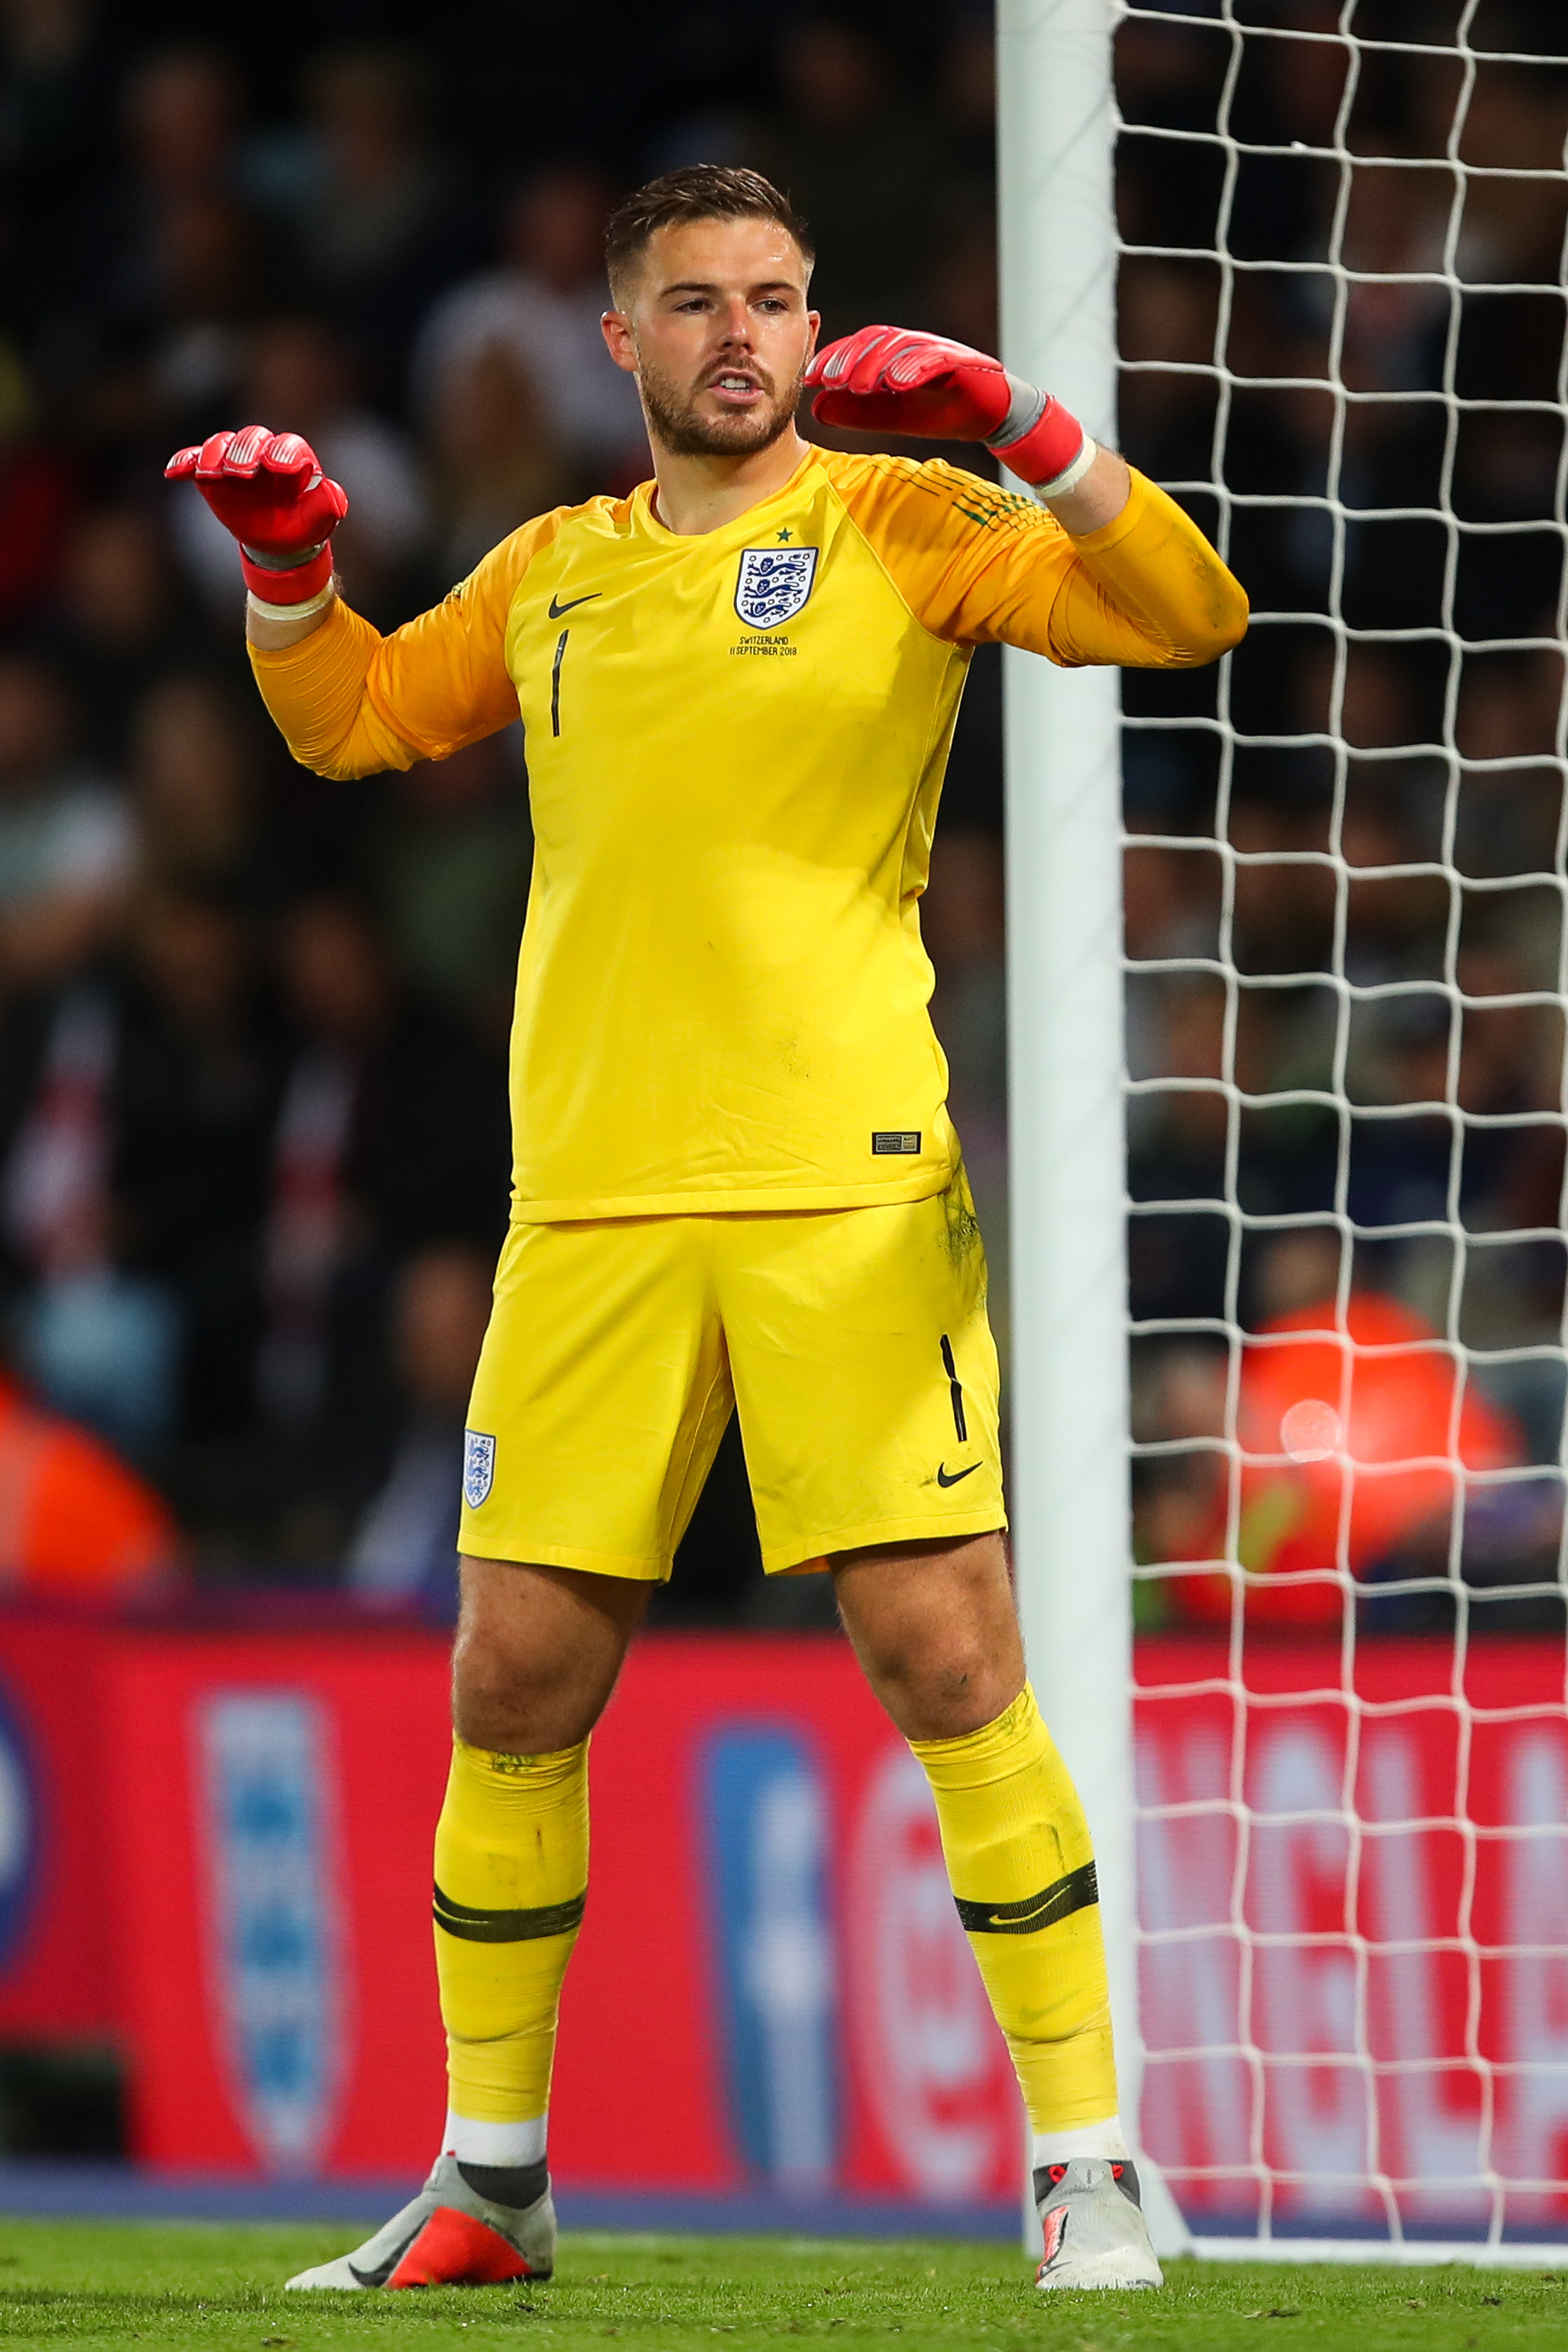 The goalkeeper could be given a shock England recall